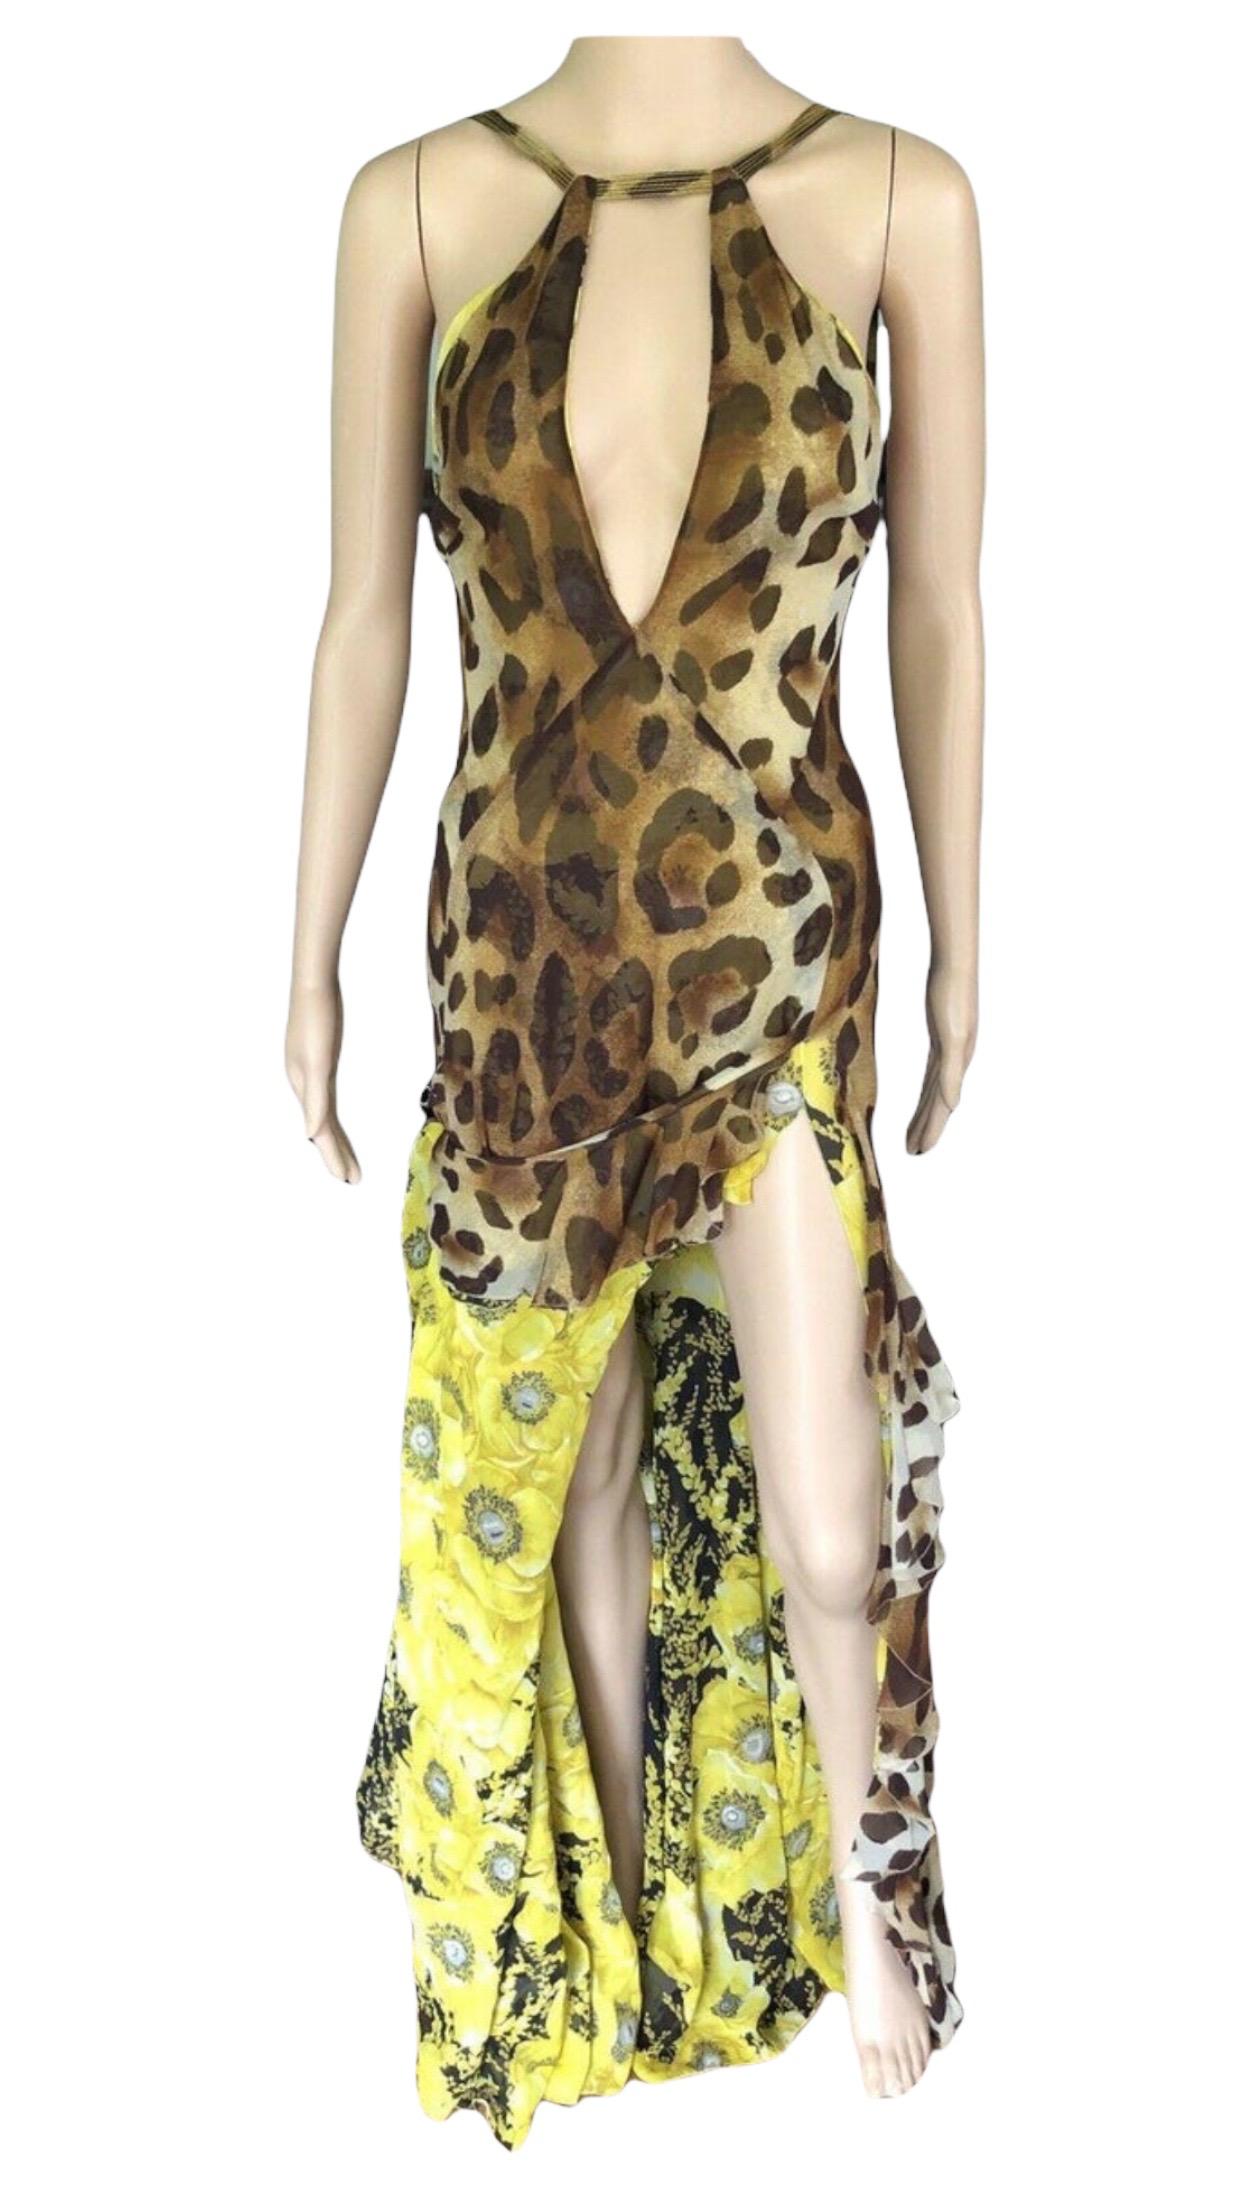 Gianni Versace S/S 2002 Vintage Plunged Backless Dress Gown For Sale 1